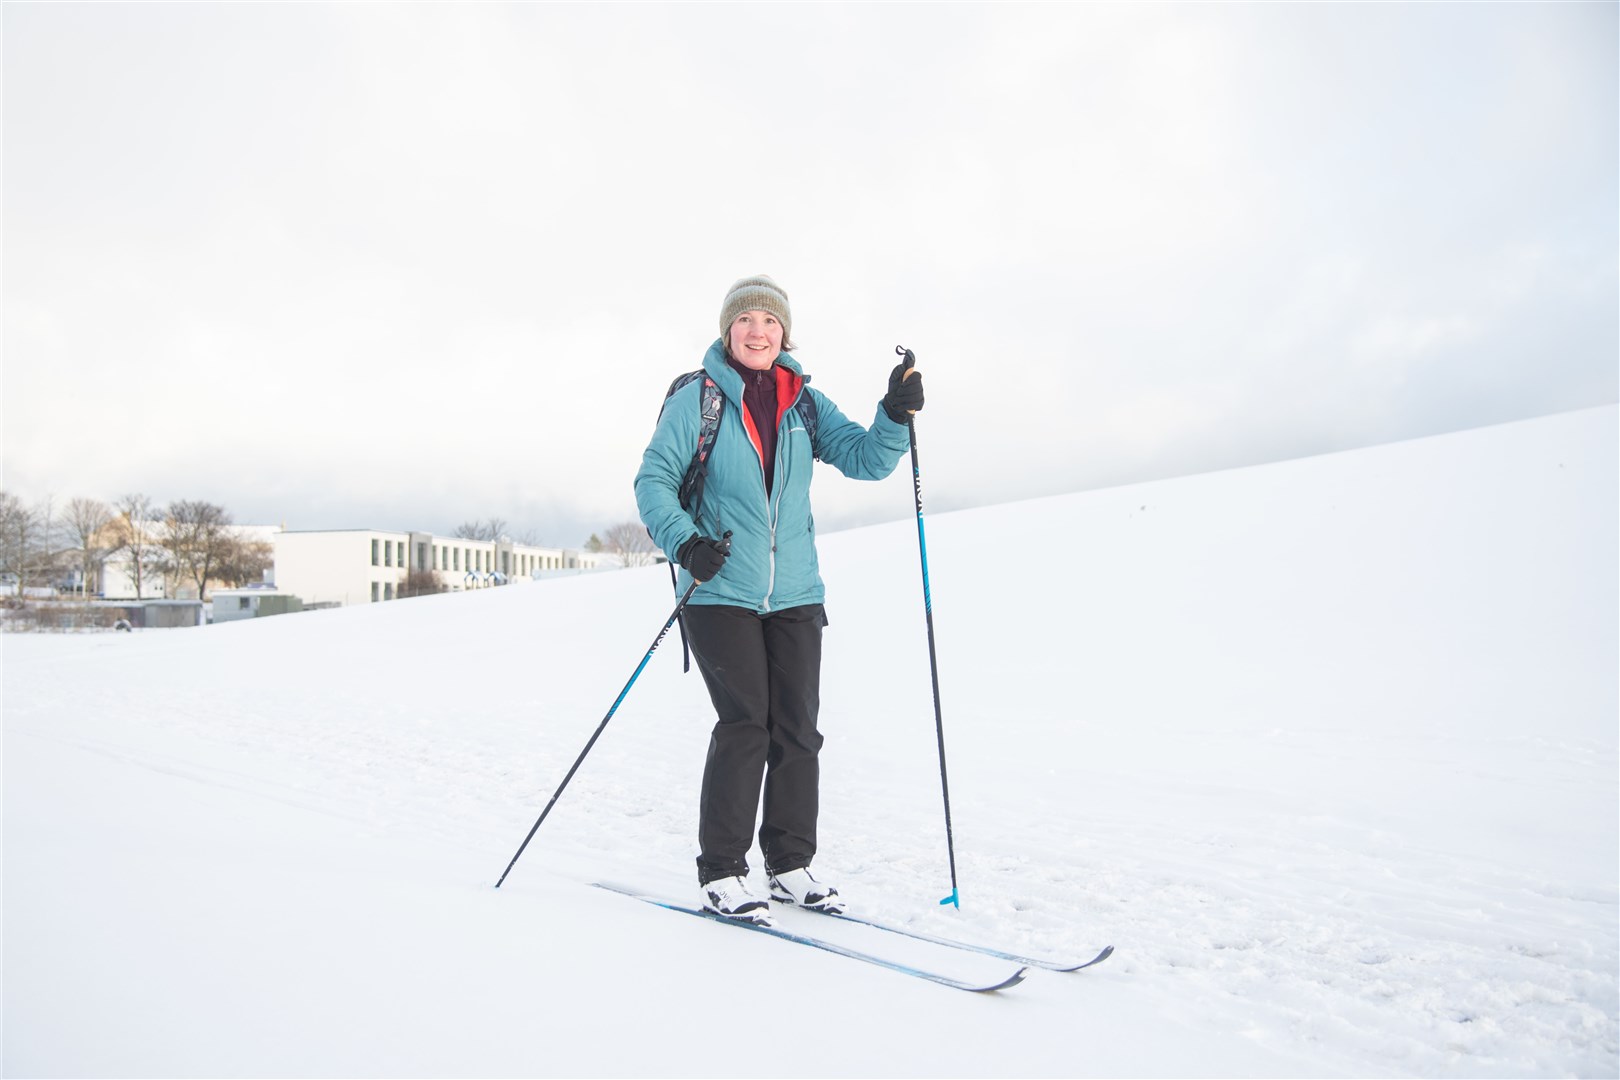 Rachel Crichton tackled the snowy conditions by using skis she got for Christmas. Picture: Daniel Forsyth